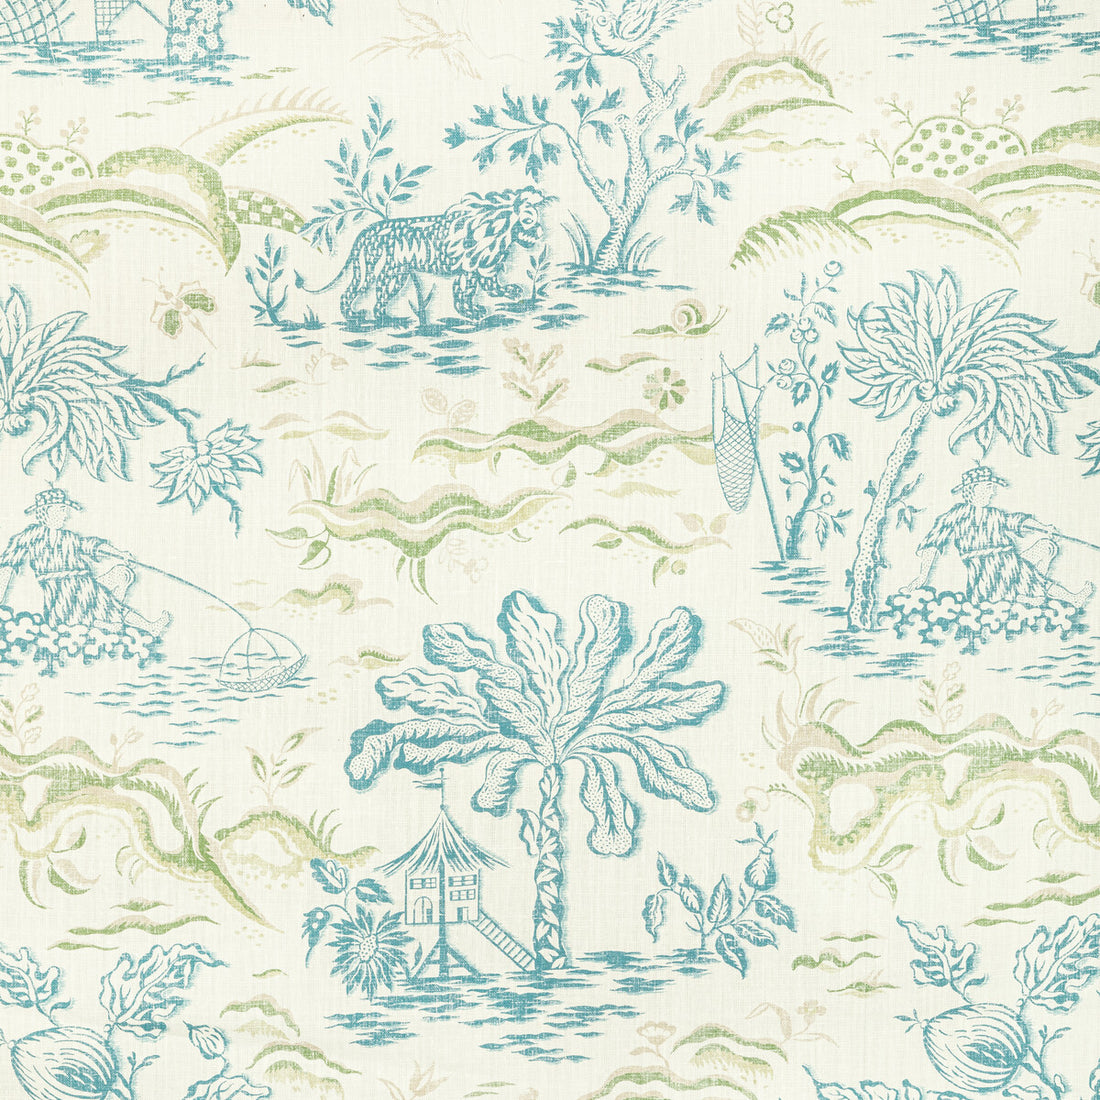 Valensole Print fabric in teal/leaf color - pattern 8022101.353.0 - by Brunschwig &amp; Fils in the Manoir collection